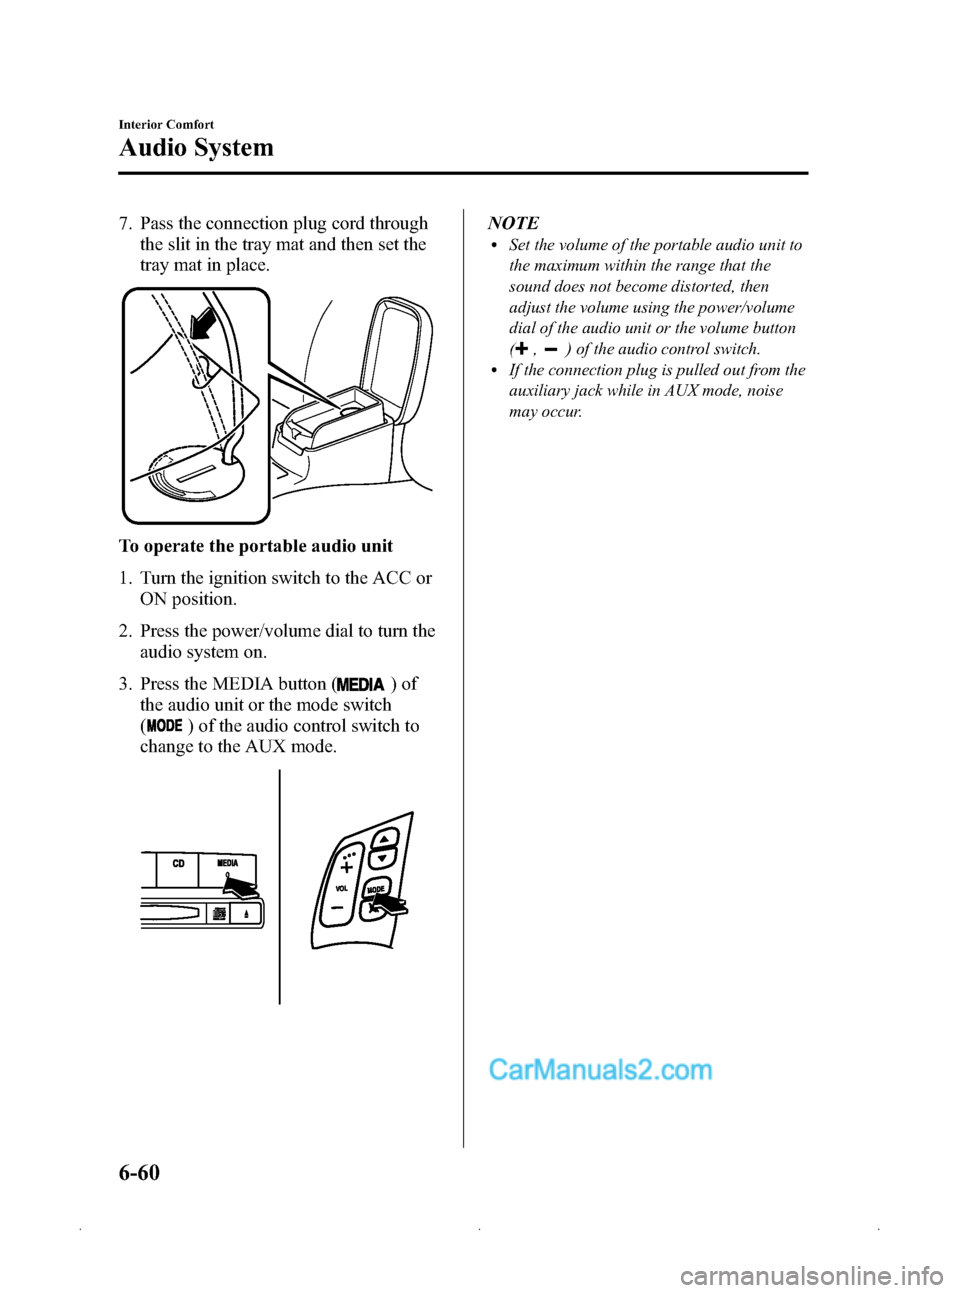 MAZDA MODEL MAZDASPEED 3 2009  Owners Manual (in English) Black plate (244,1)
7. Pass the connection plug cord throughthe slit in the tray mat and then set the
tray mat in place.
To operate the portable audio unit
1. Turn the ignition switch to the ACC or
ON